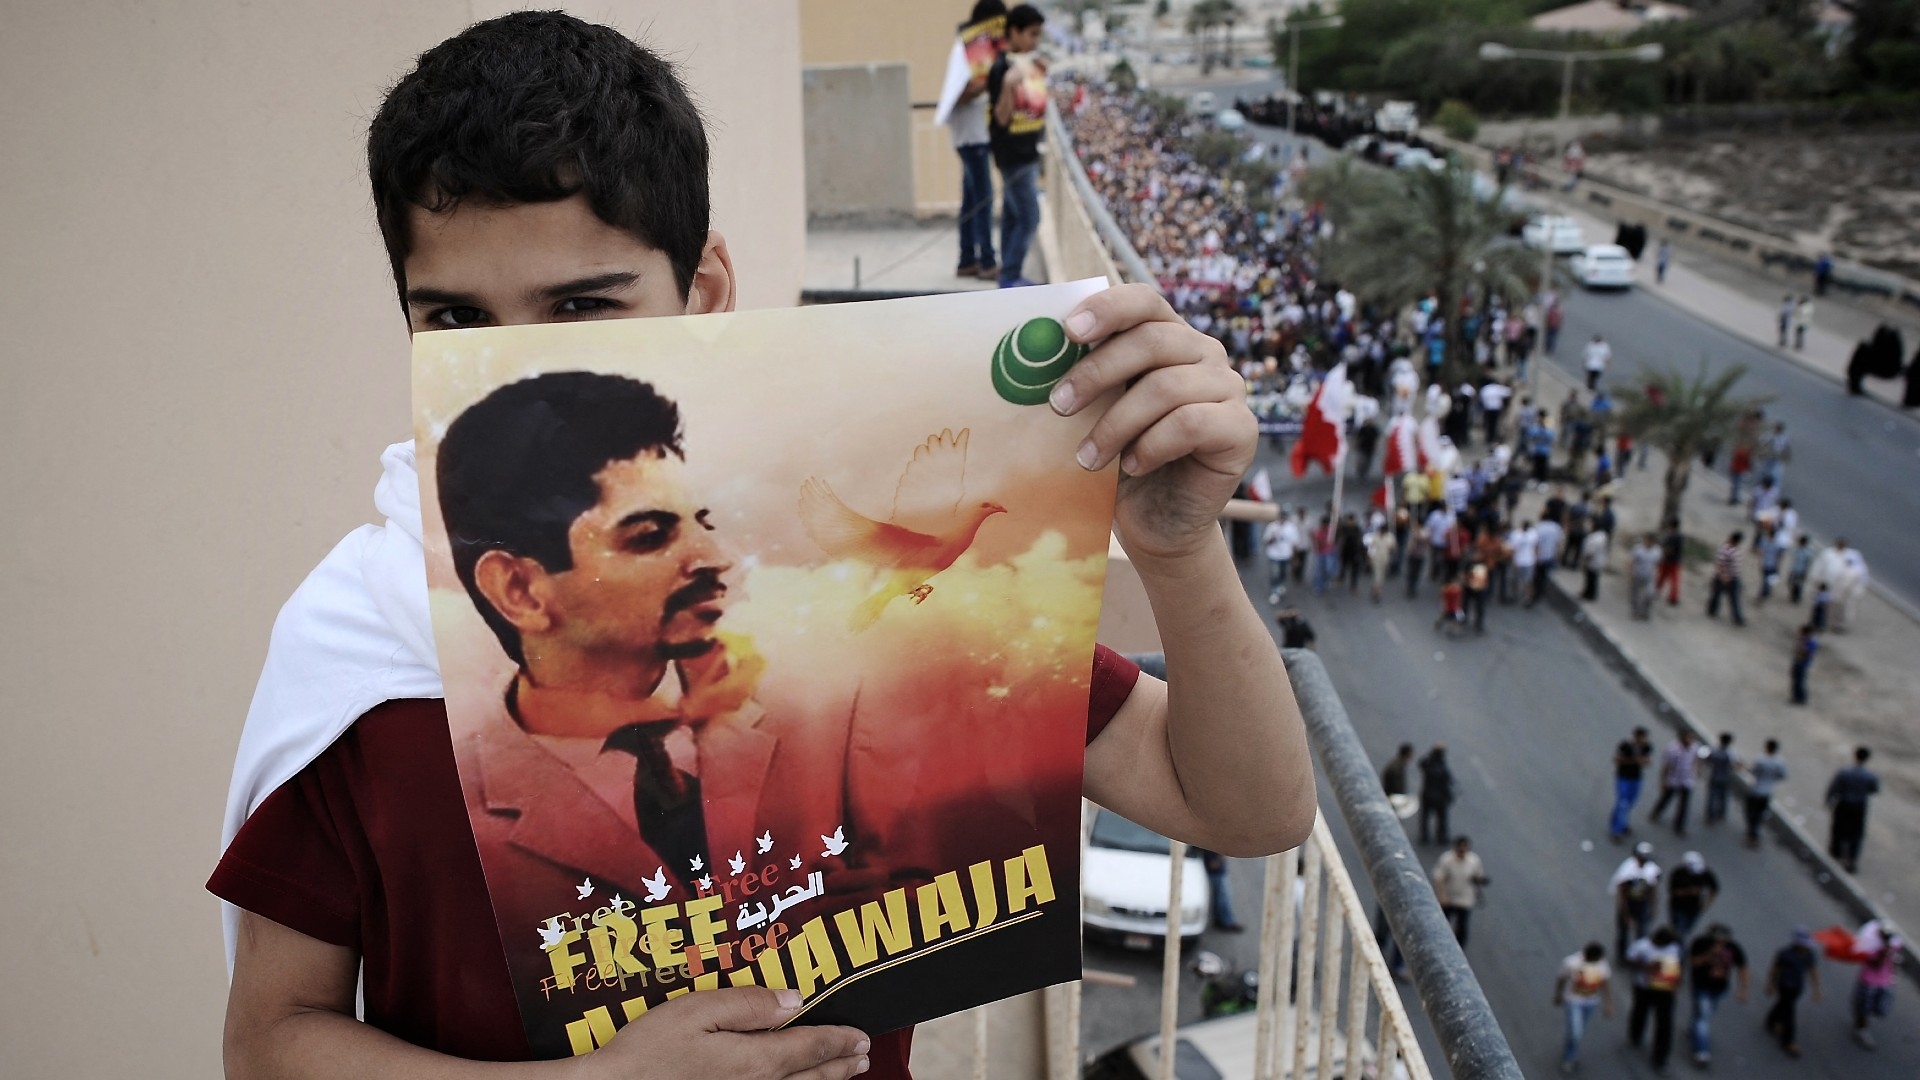 A Bahraini boy holds a poster of jailed activist Abdul-Hadi al-Khawaja during a protest calling for his release in the village of Jidhafs, west of Manama, on 6 April 2012 (AFP)